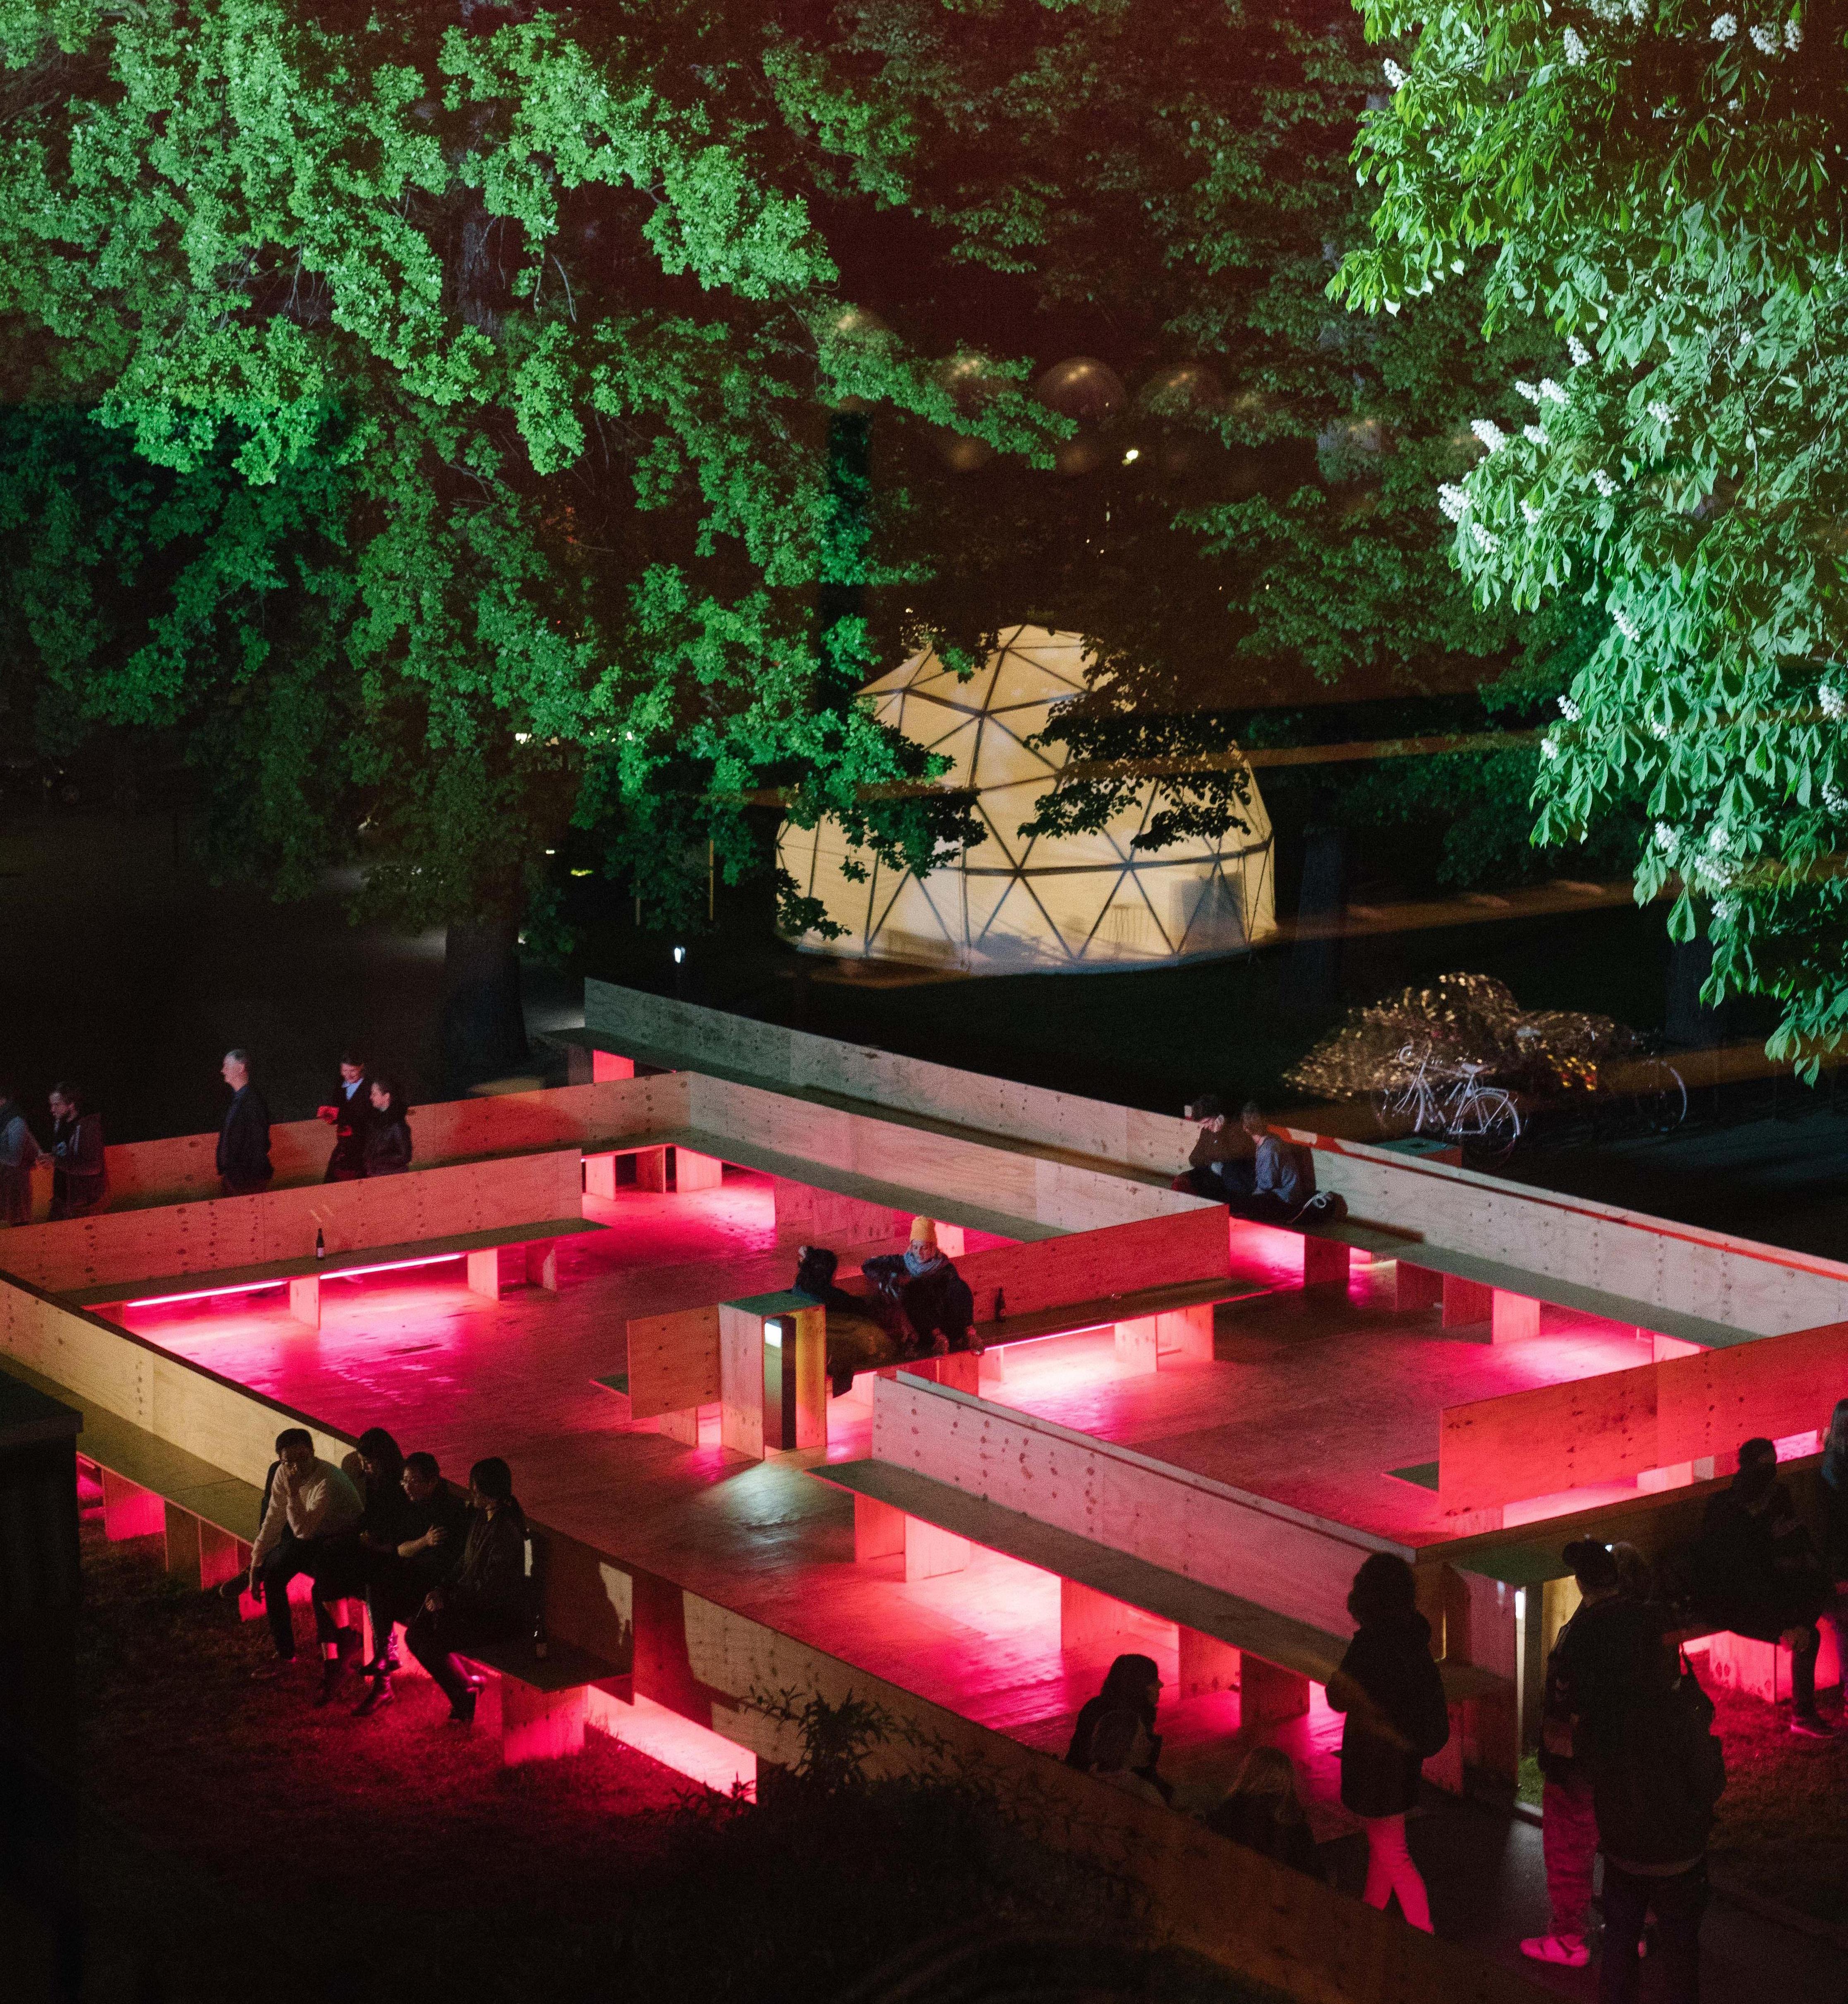 Wooden benches on the forecourt of the Haus der Berliner Festspiele are arranged like a maze and illuminated by pink light at night.